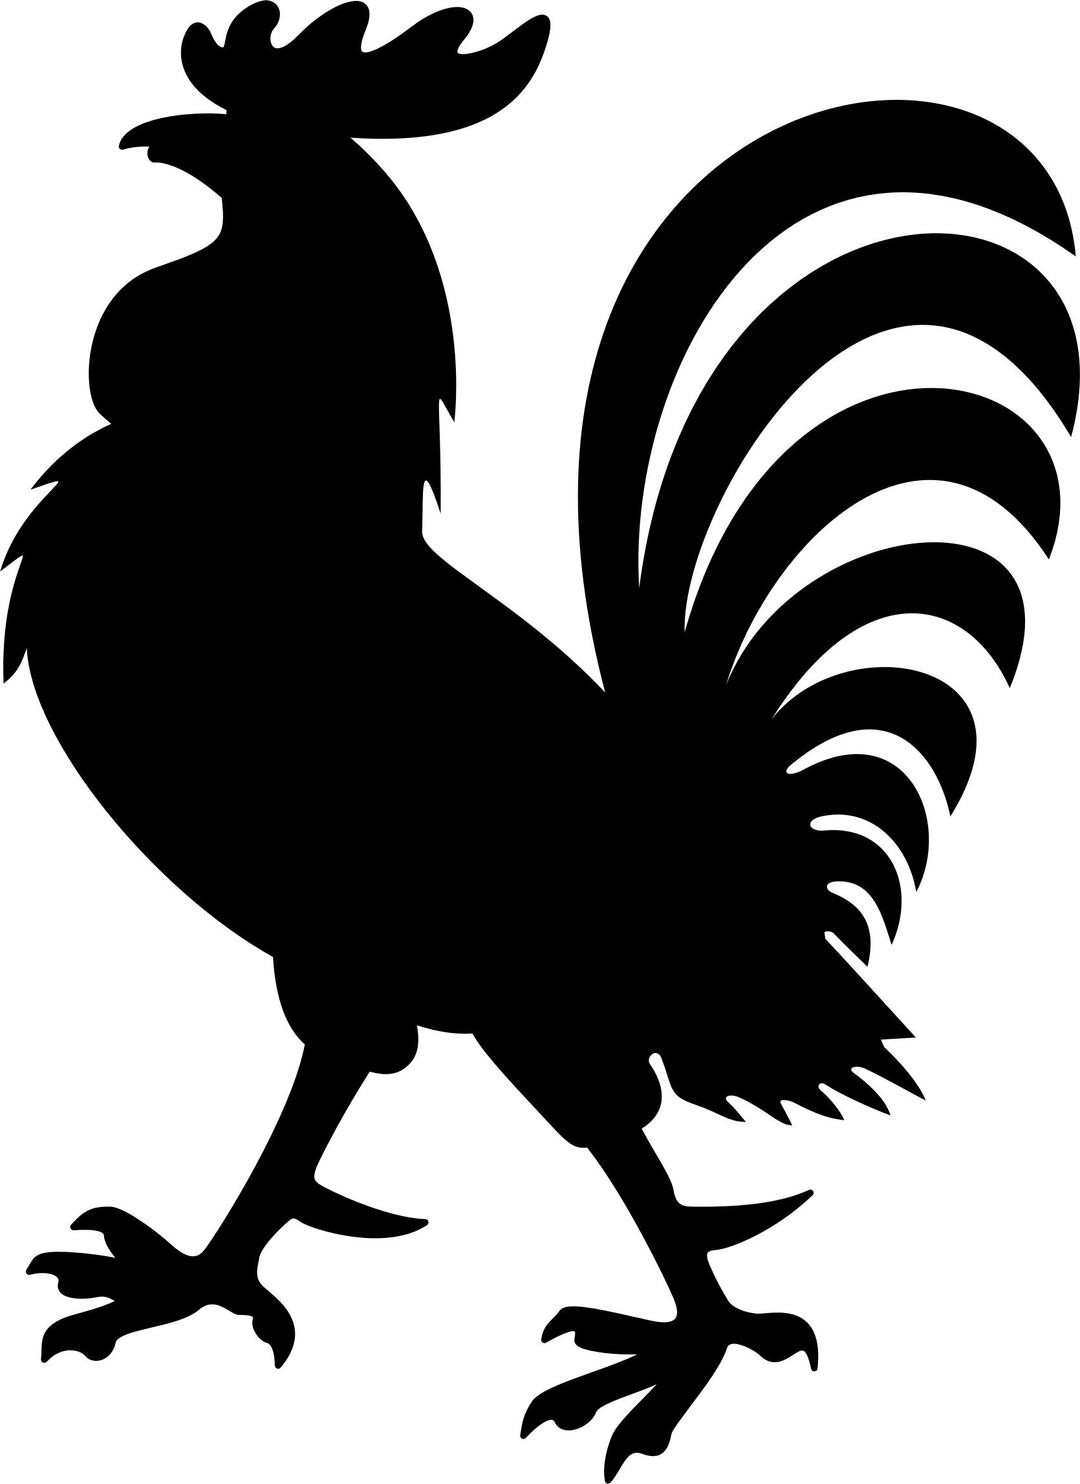 Rooster Silhouette 2 png transparent